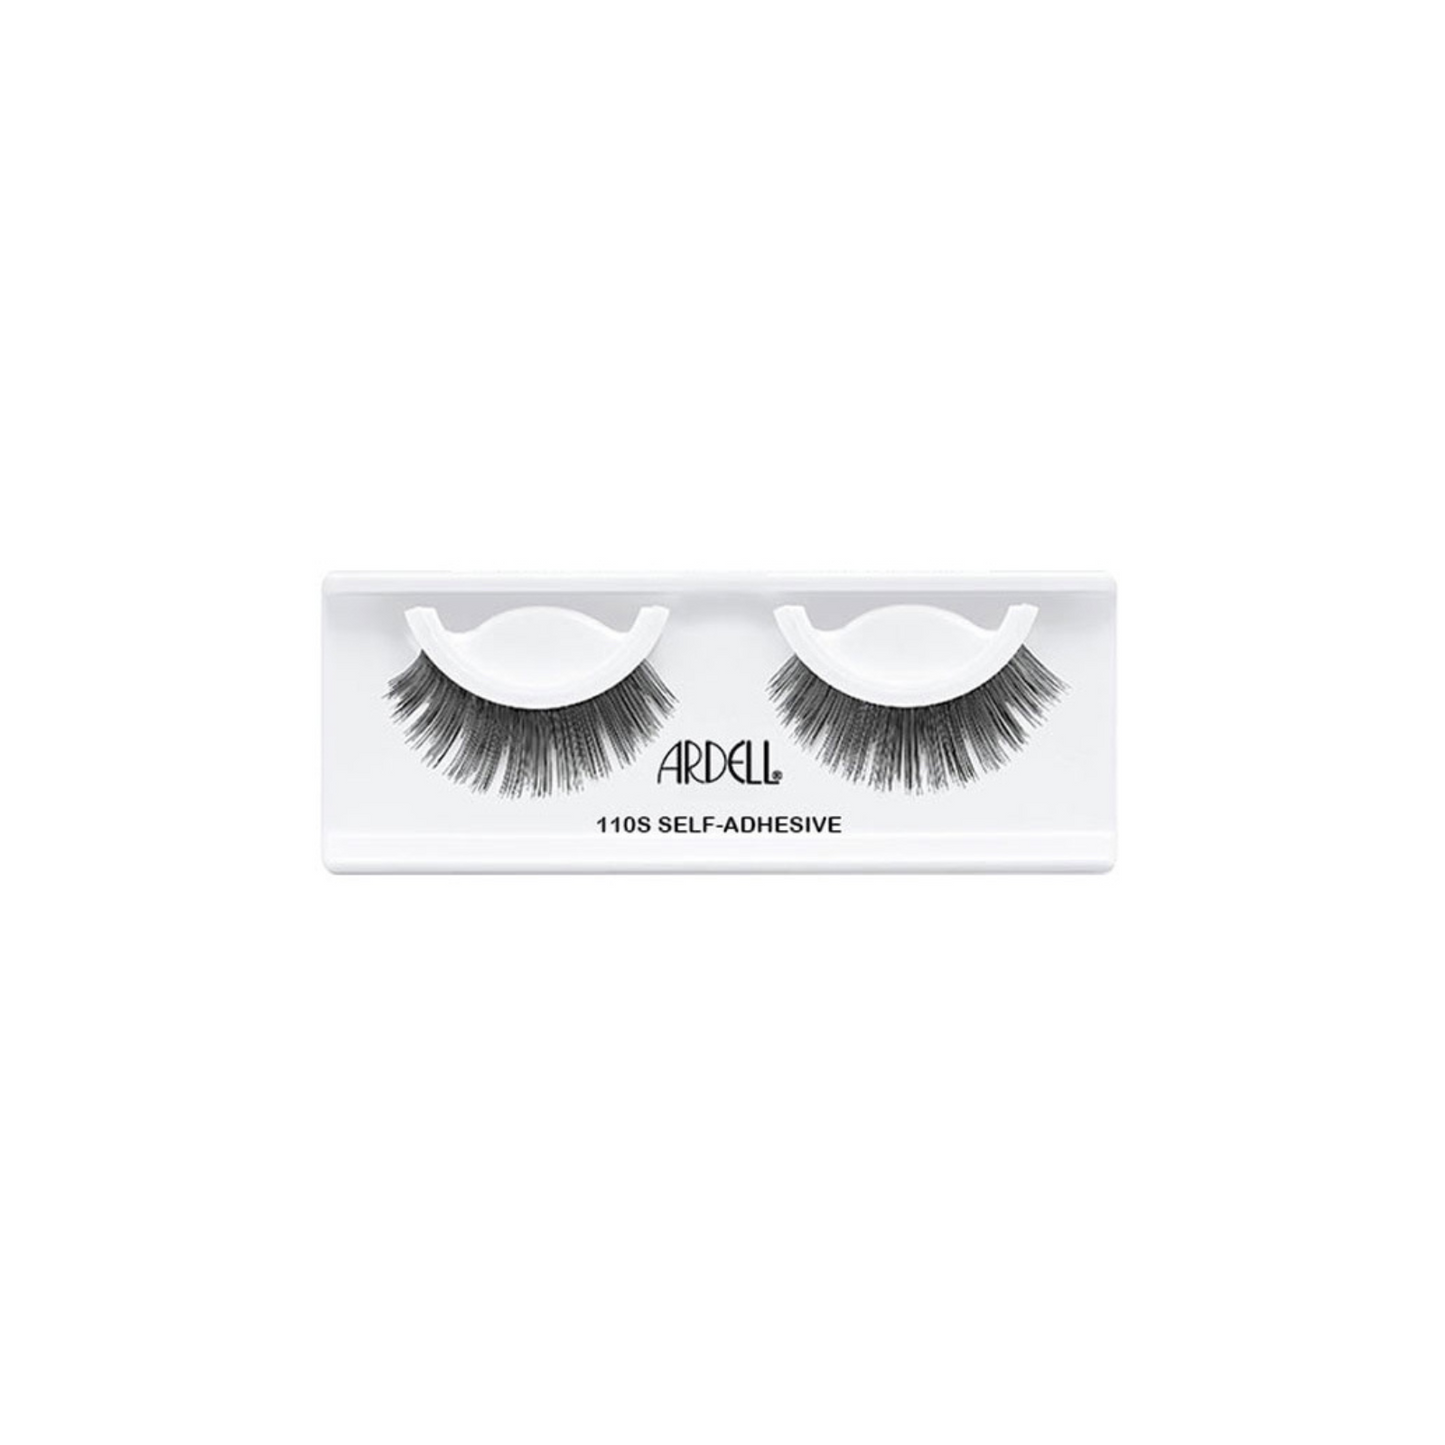 Ardell Professional Self-Adhesive Strip Lashes